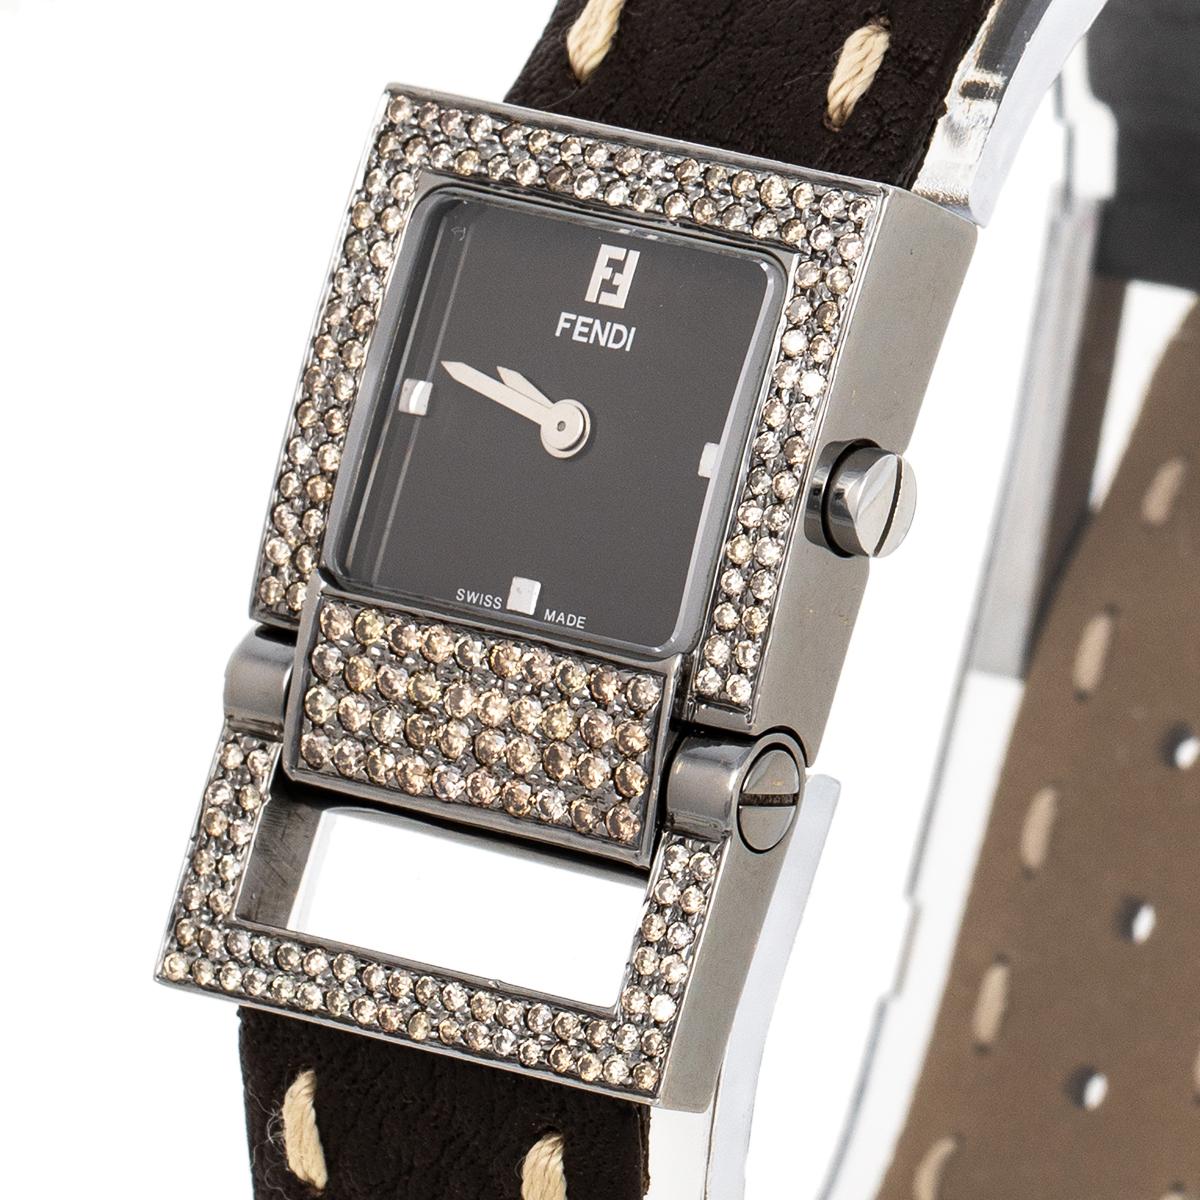 Beautiful and elegant, this timepiece is a Fendi creation. Swiss-made, it has a stainless steel case with a diamond-embellished bezel and it is held by the signature Selleria stitch-detailed leather straps with a buckle. The watch has a brown dial